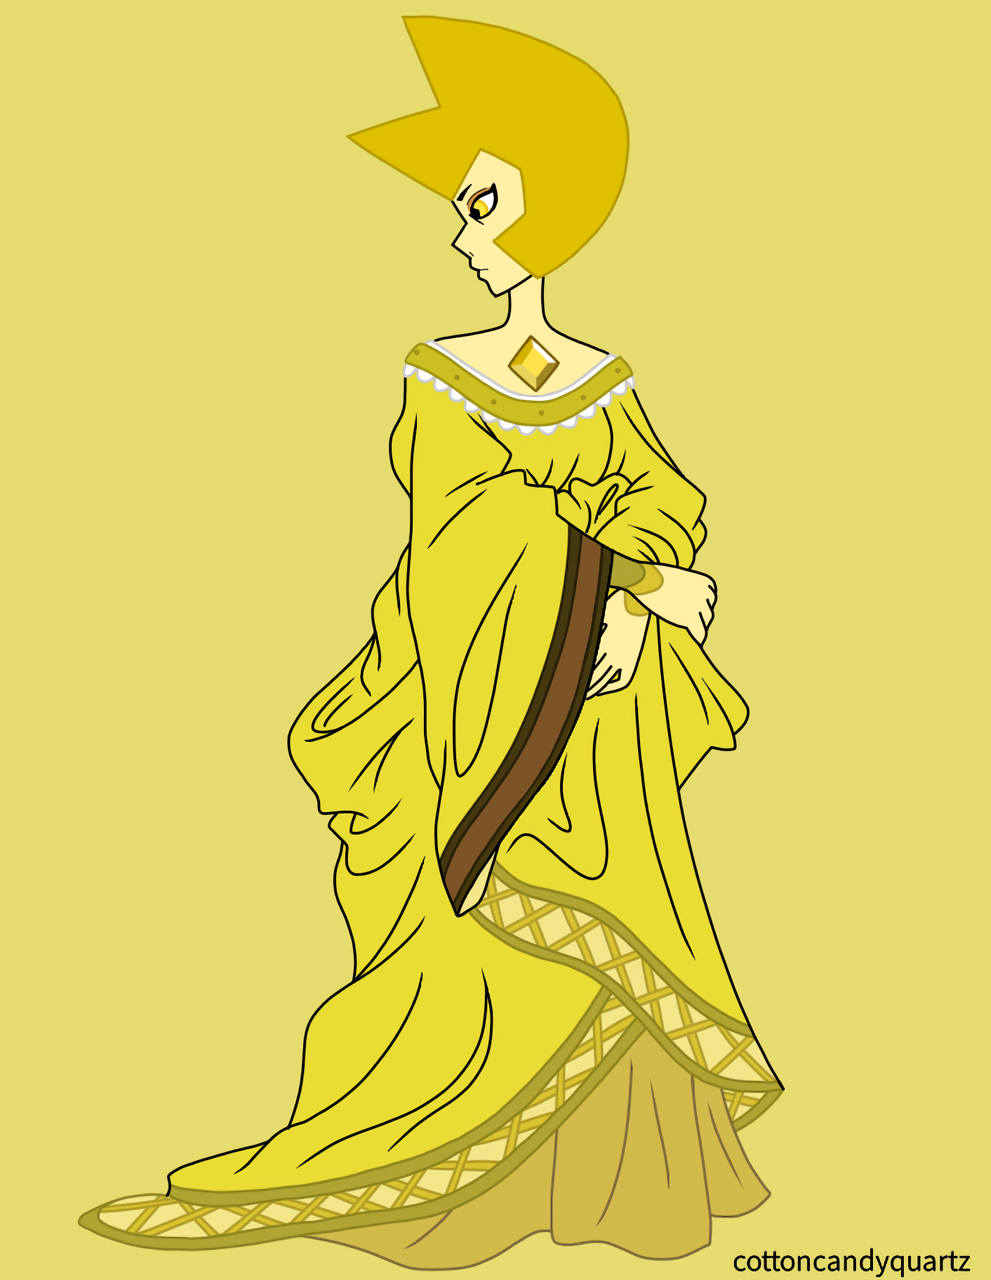 Again, the tables have turned. The game? SWITCHED! A redraw of an older Yellow I did like a year ago but never liked how it came out, this time I’m much more happier with it. She be a noblewoman from...